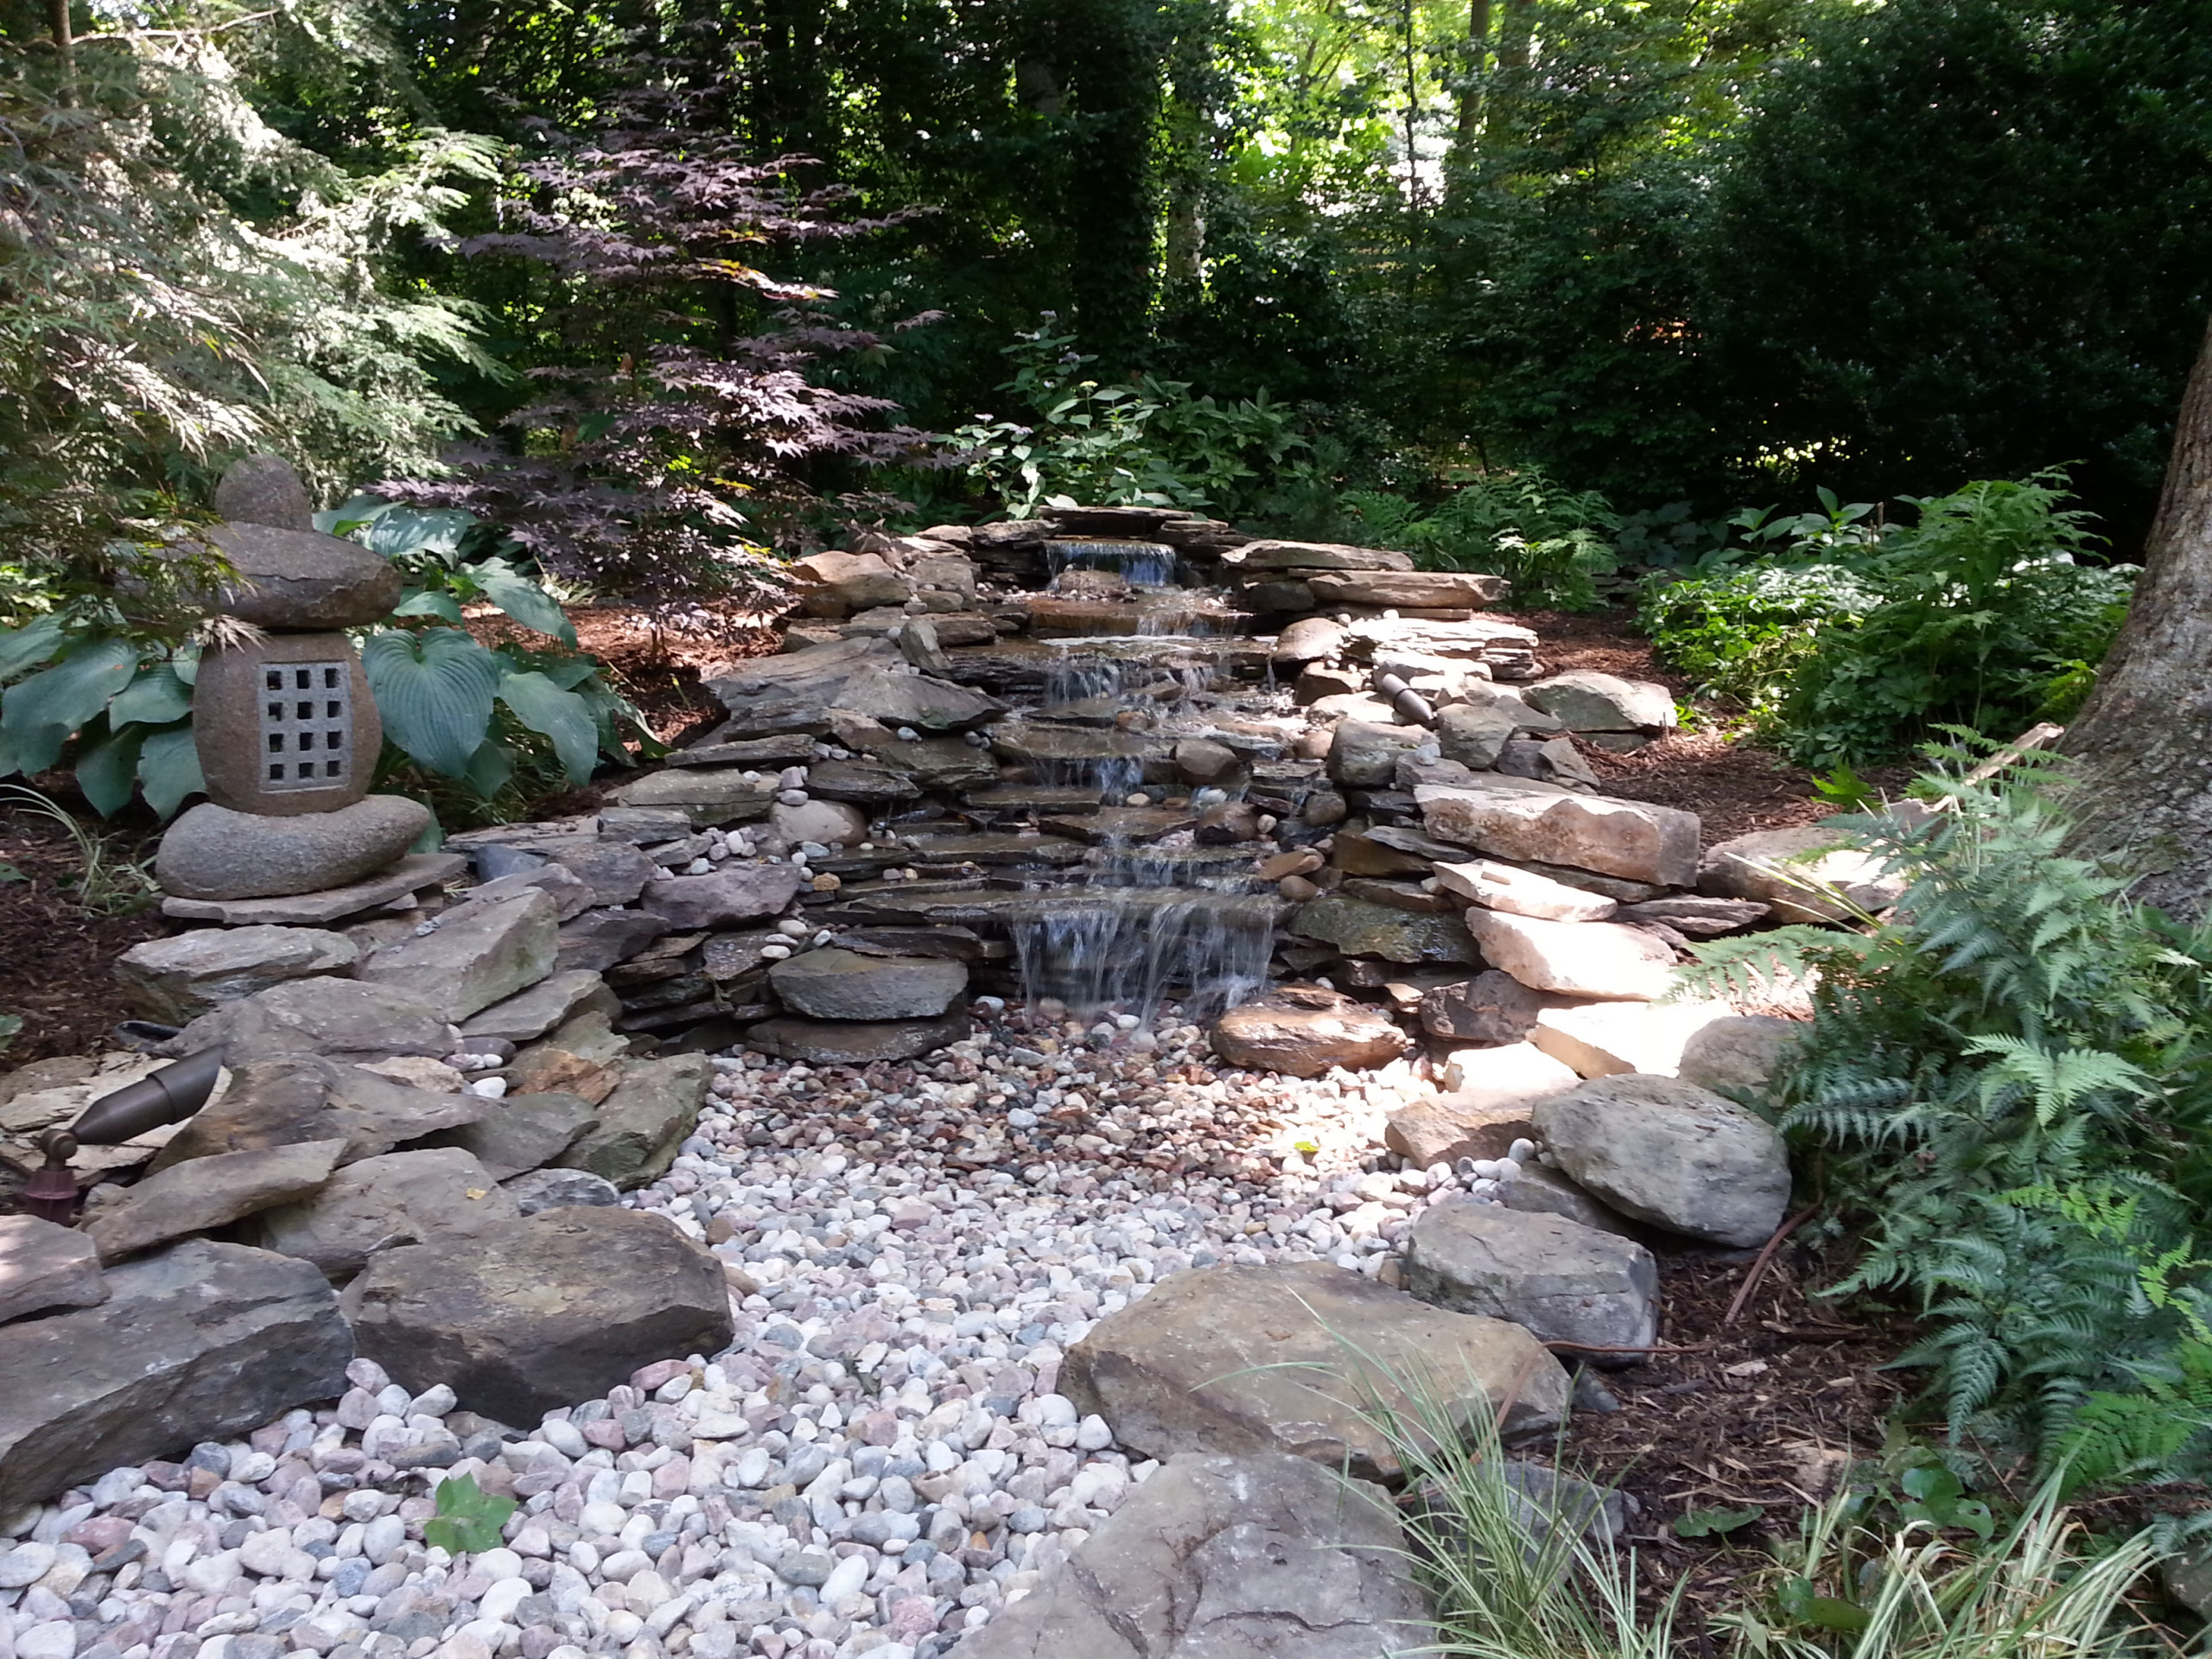 Water features/Water falls/Koi Ponds